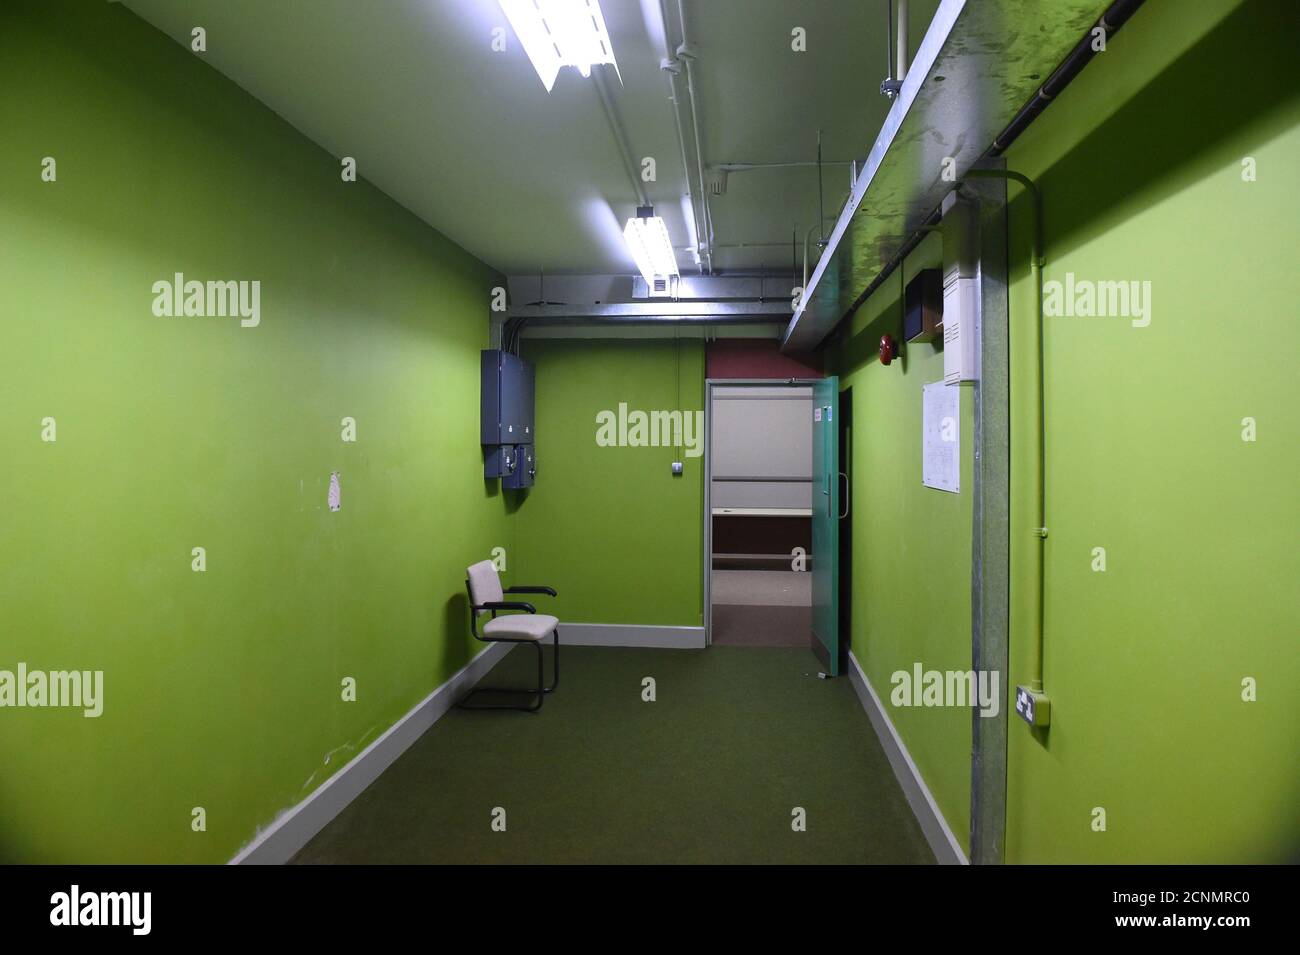 Corridor is seen in a former Regional Government HQ Nuclear bunker built by the British government during the Cold War which  has come up for sale in Ballymena, Northern Ireland on February 4, 2016. It is owned by the Office of Northern Ireland's First Minister and Deputy First Minister and capable of accommodating 236 personnel for extended periods. A large range of the original fixtures and fittings are to be included in the sale. It is believed to be one of the most technically advanced bunkers built in the UK with an array of advanced life support systems. In the event of a nuclear attack, Stock Photo